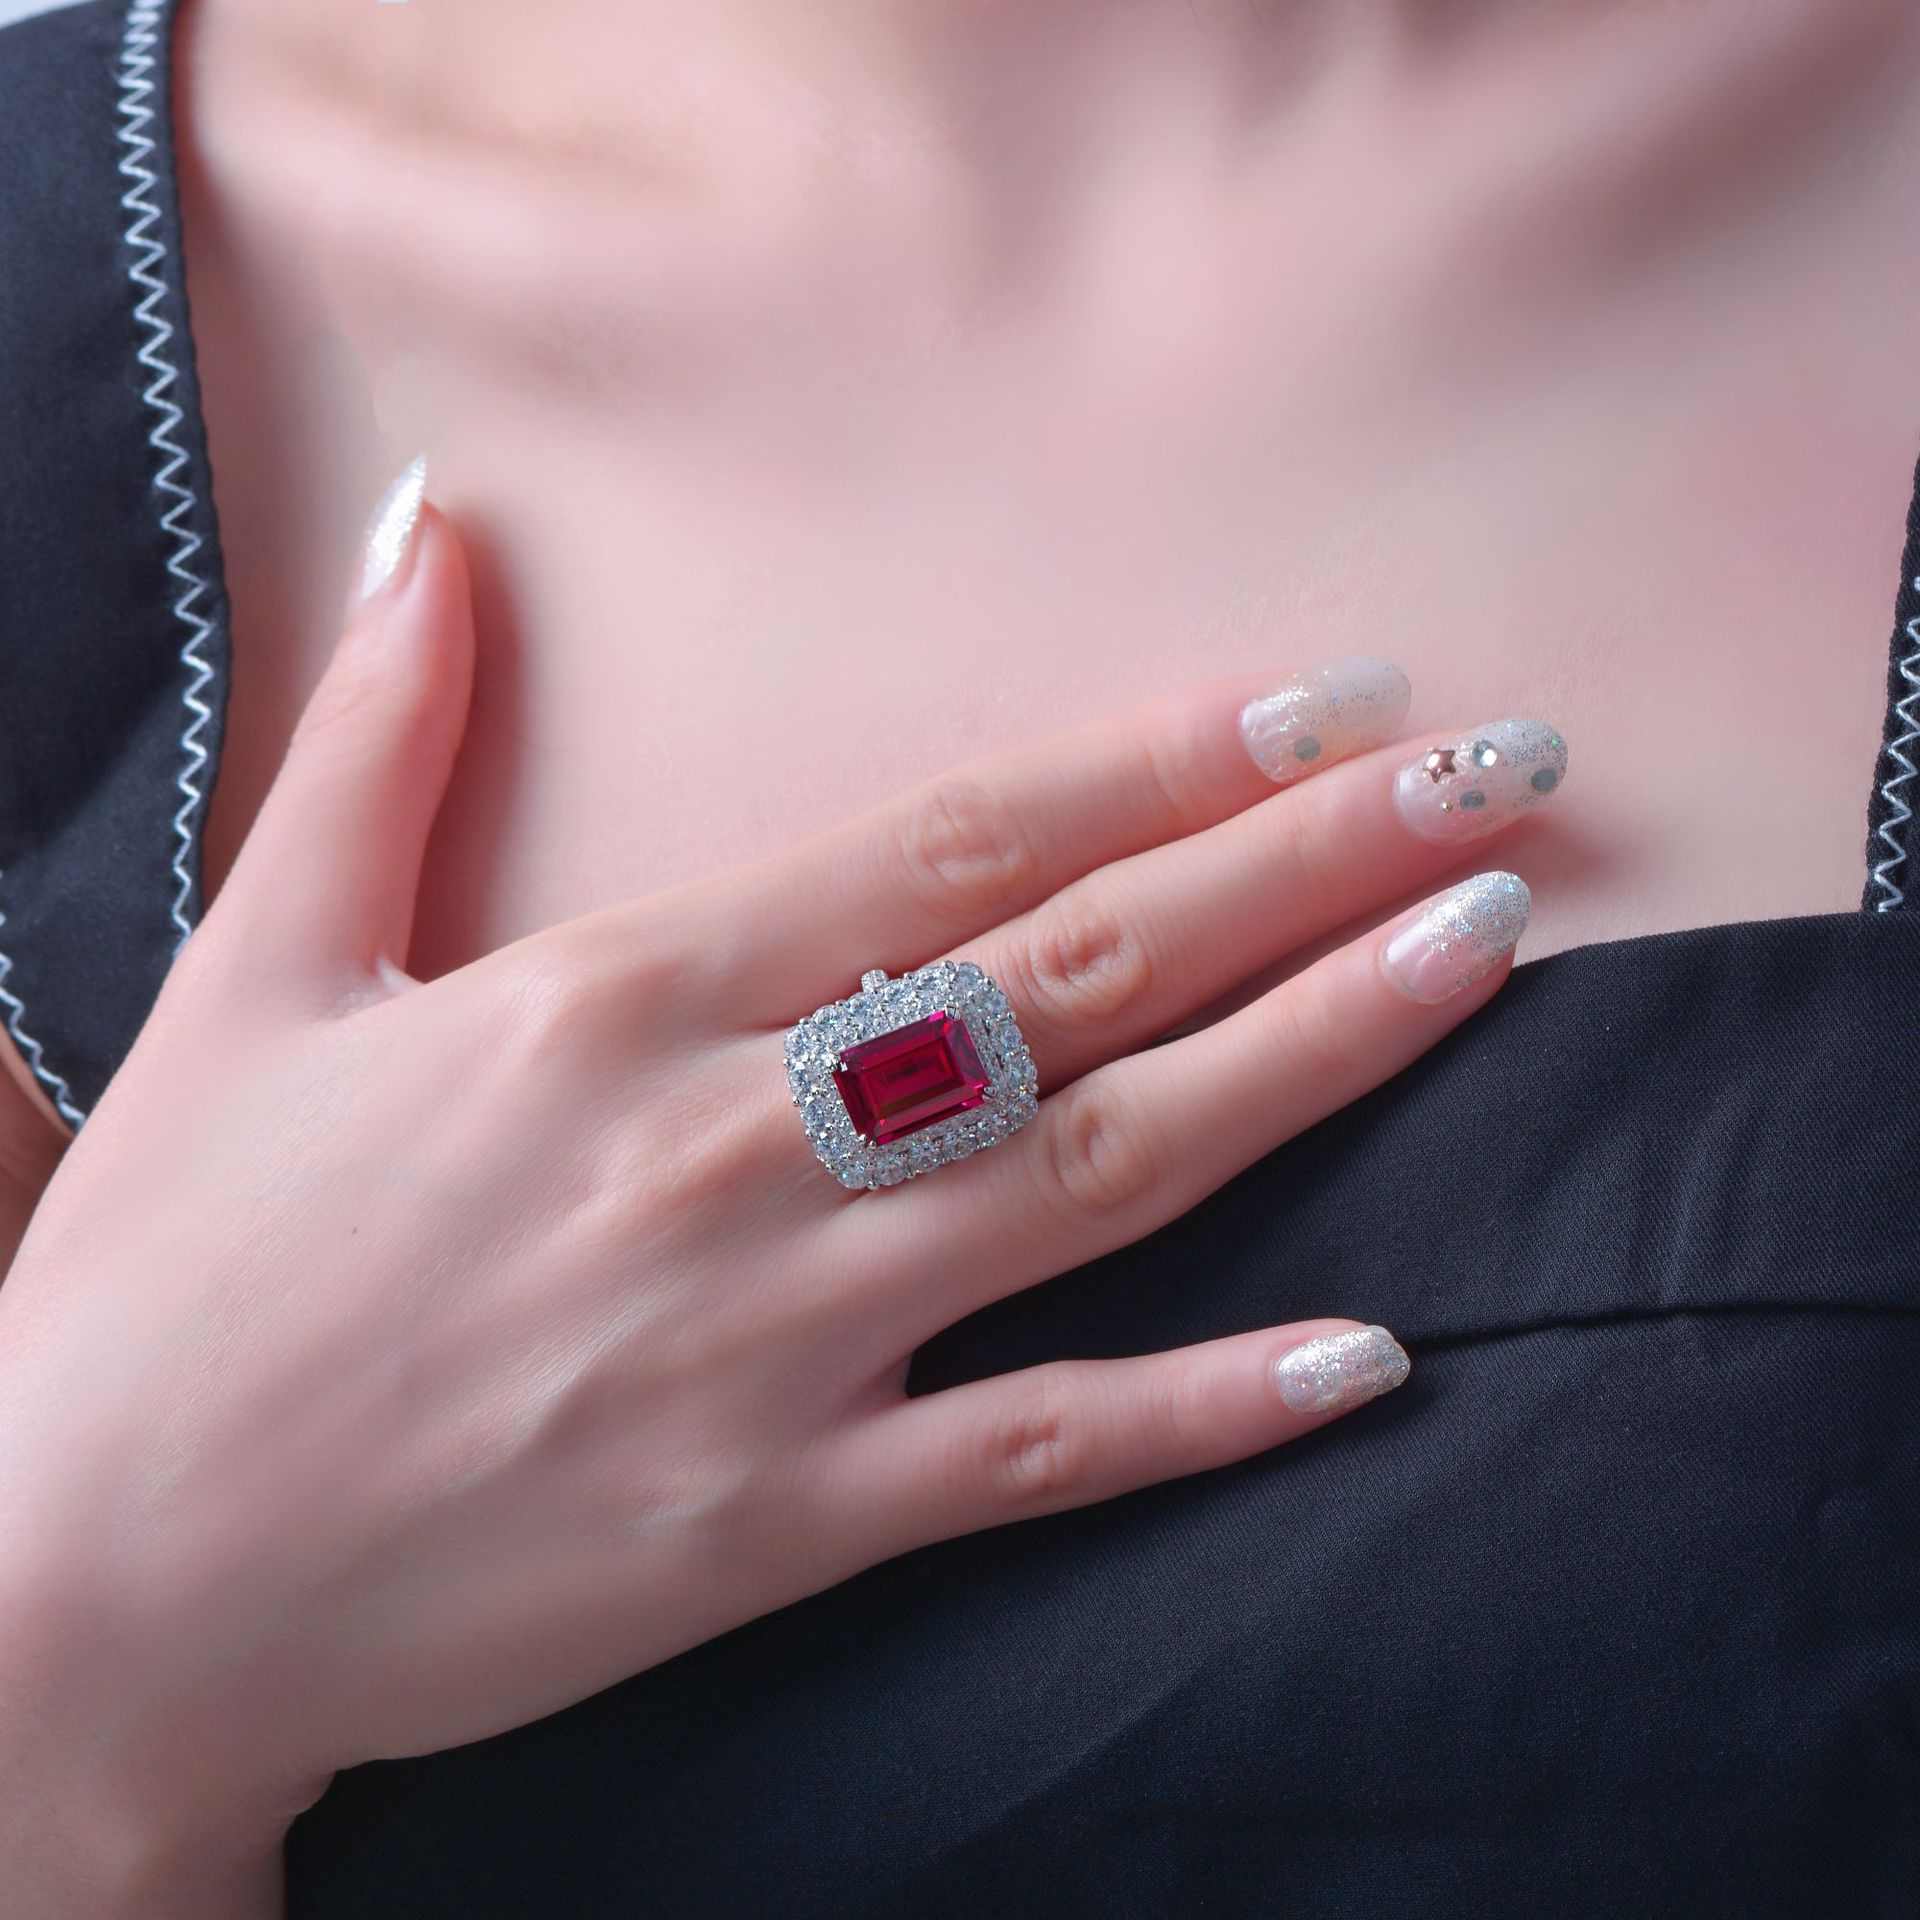 Vintage Ruby Ring with Big Stone - HER'S